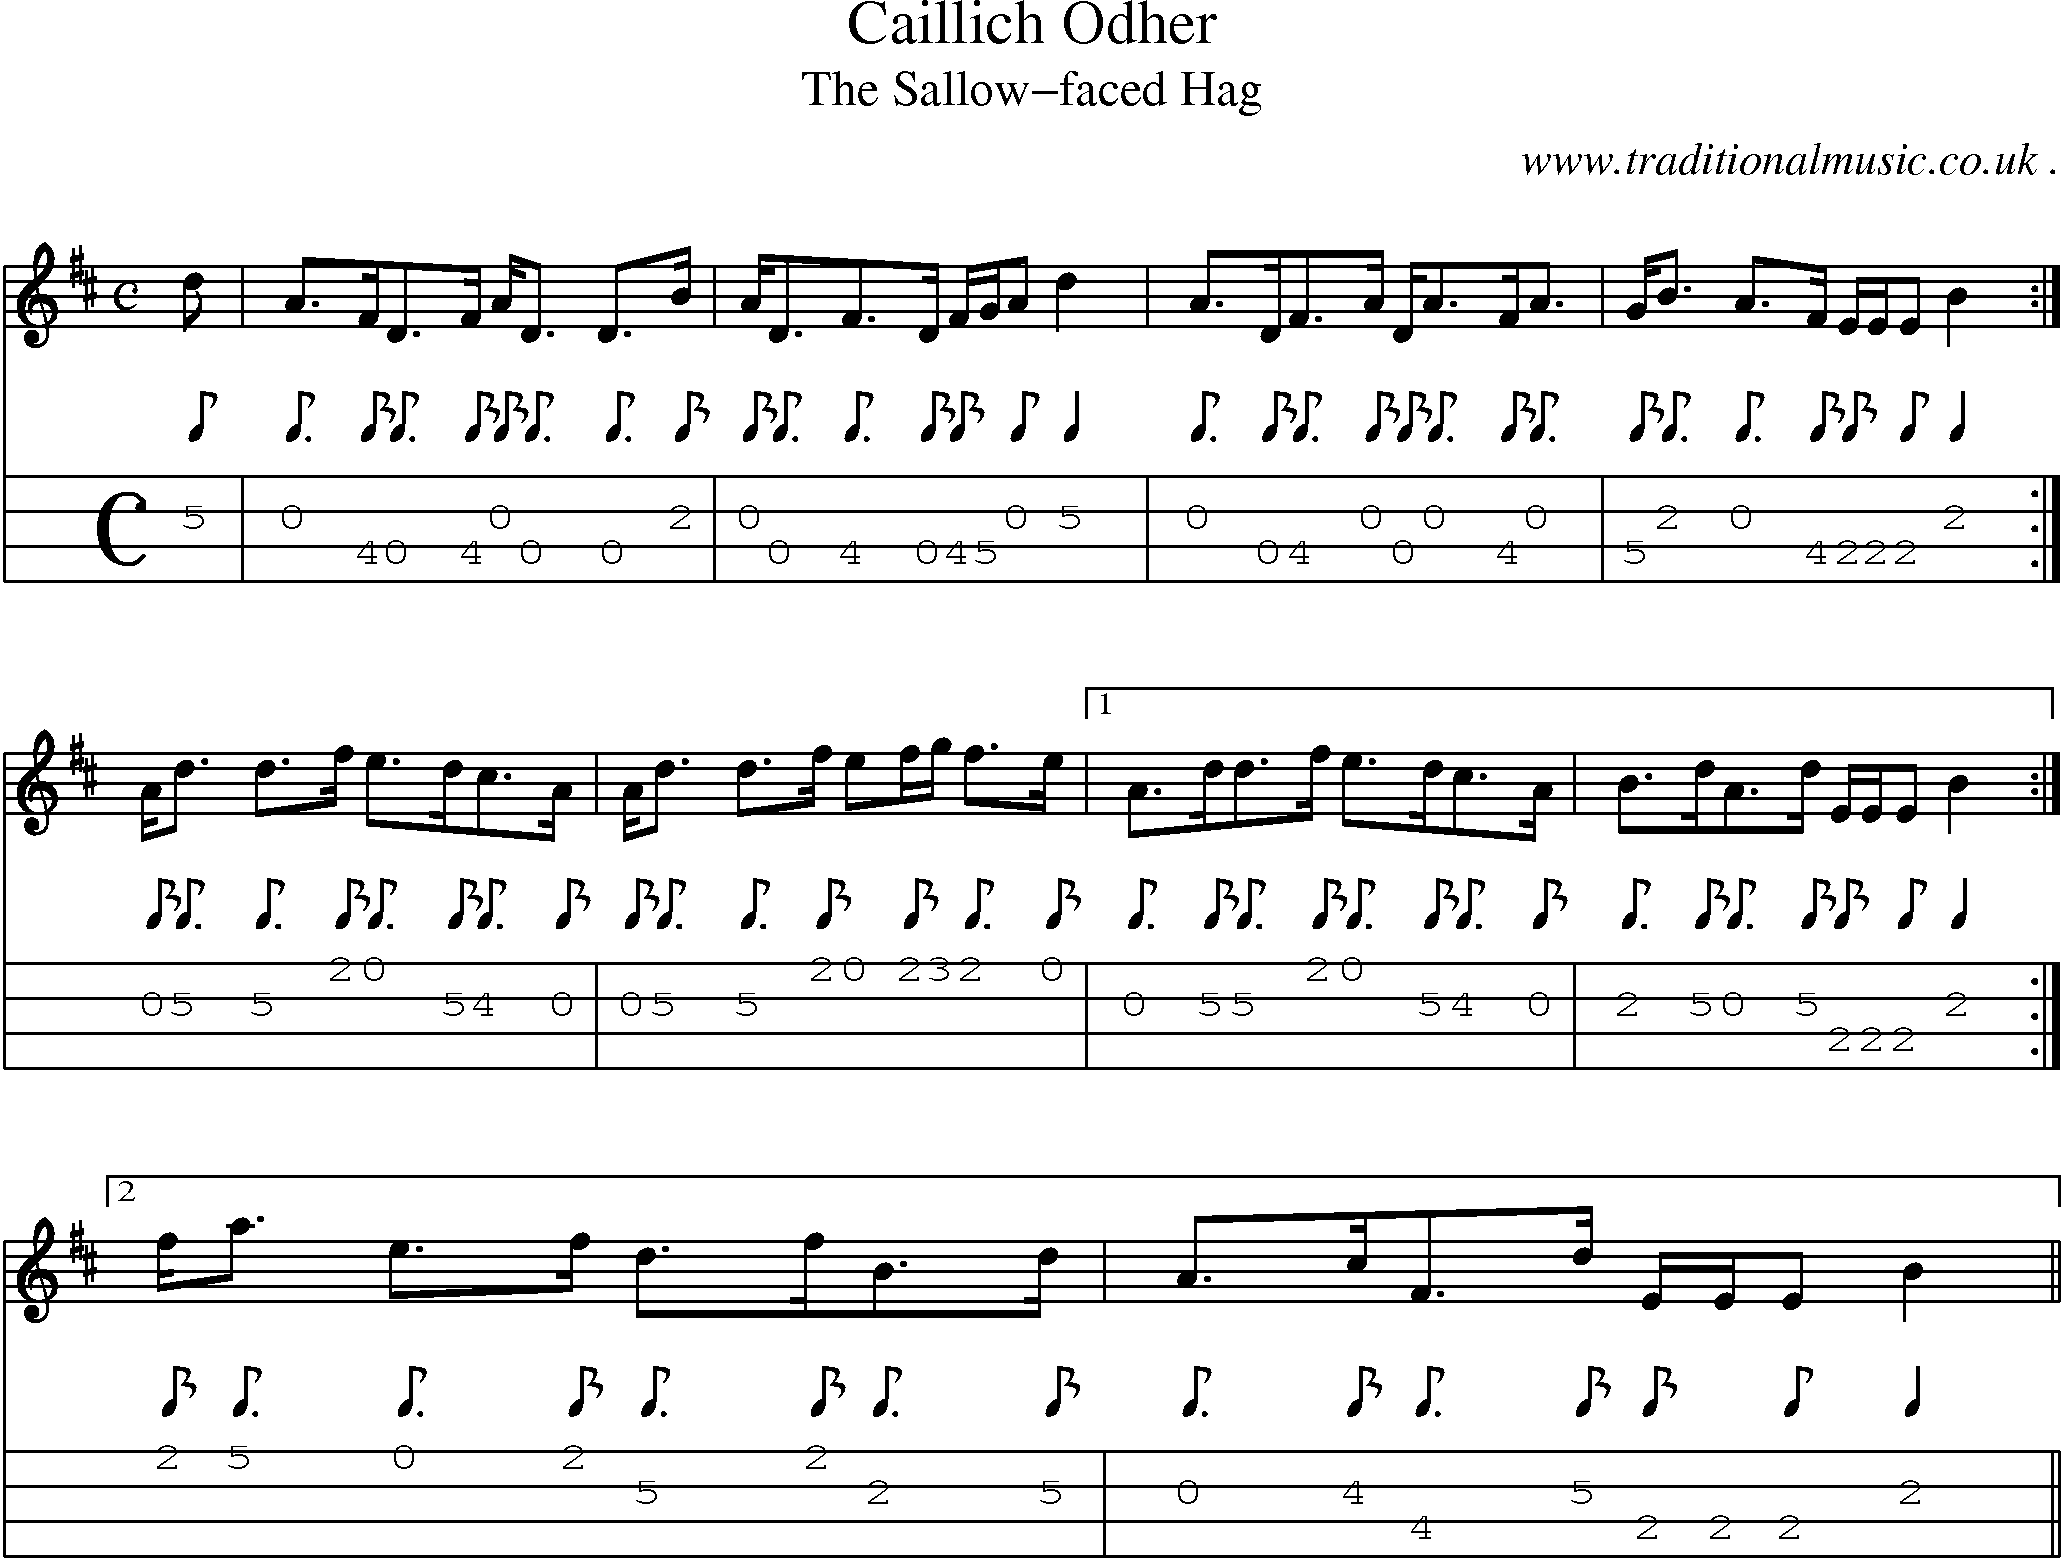 Sheet-music  score, Chords and Mandolin Tabs for Caillich Odher